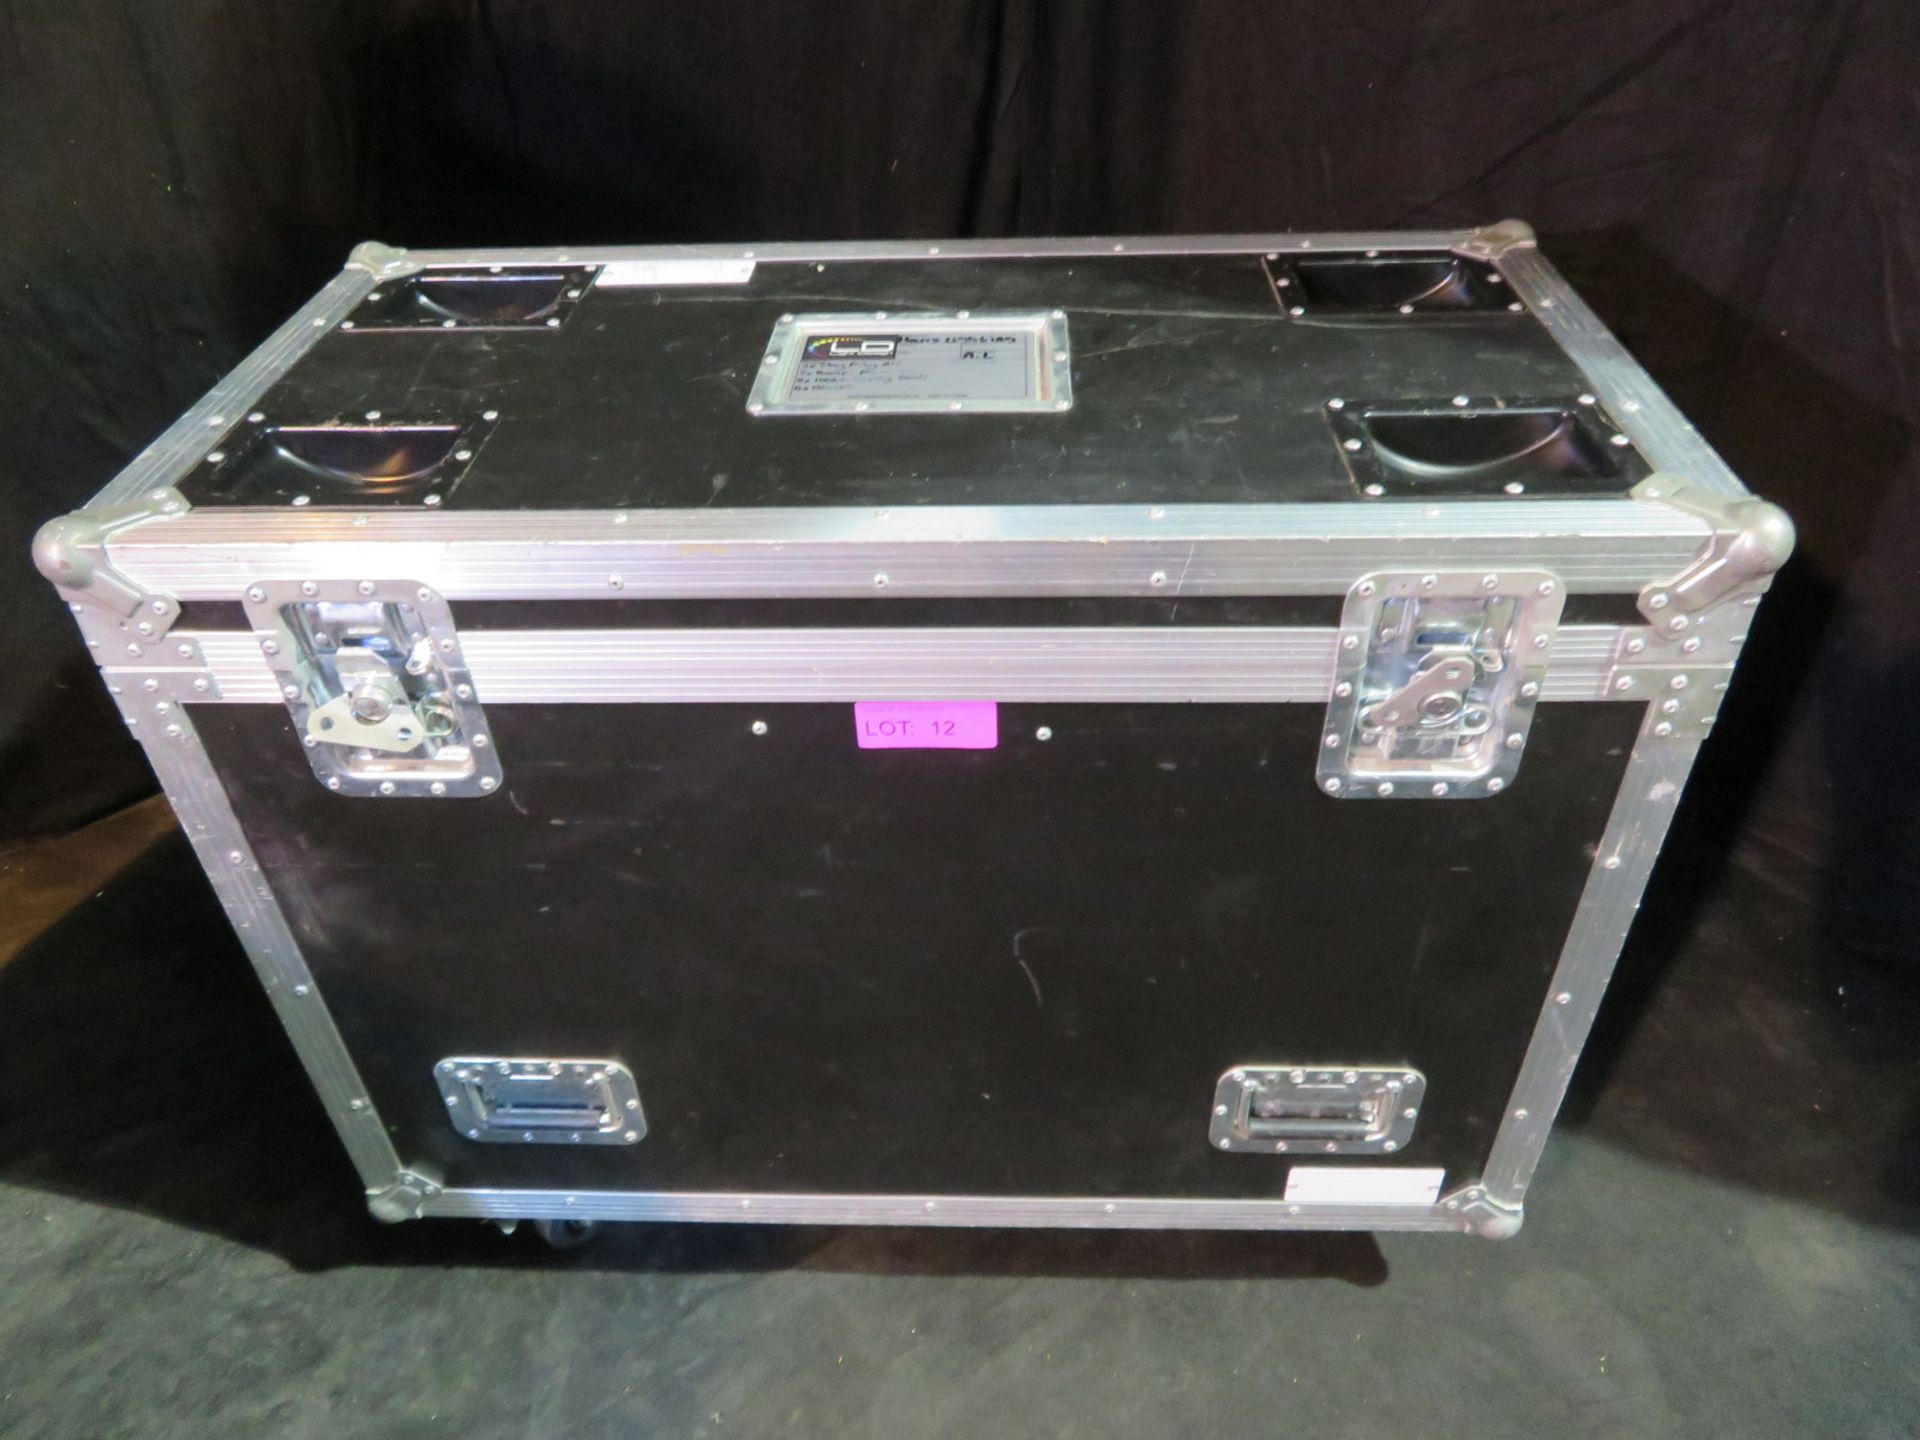 Pair of Clay Paky Alpha Spot HPE 700 in twin flightcase - Image 11 of 11